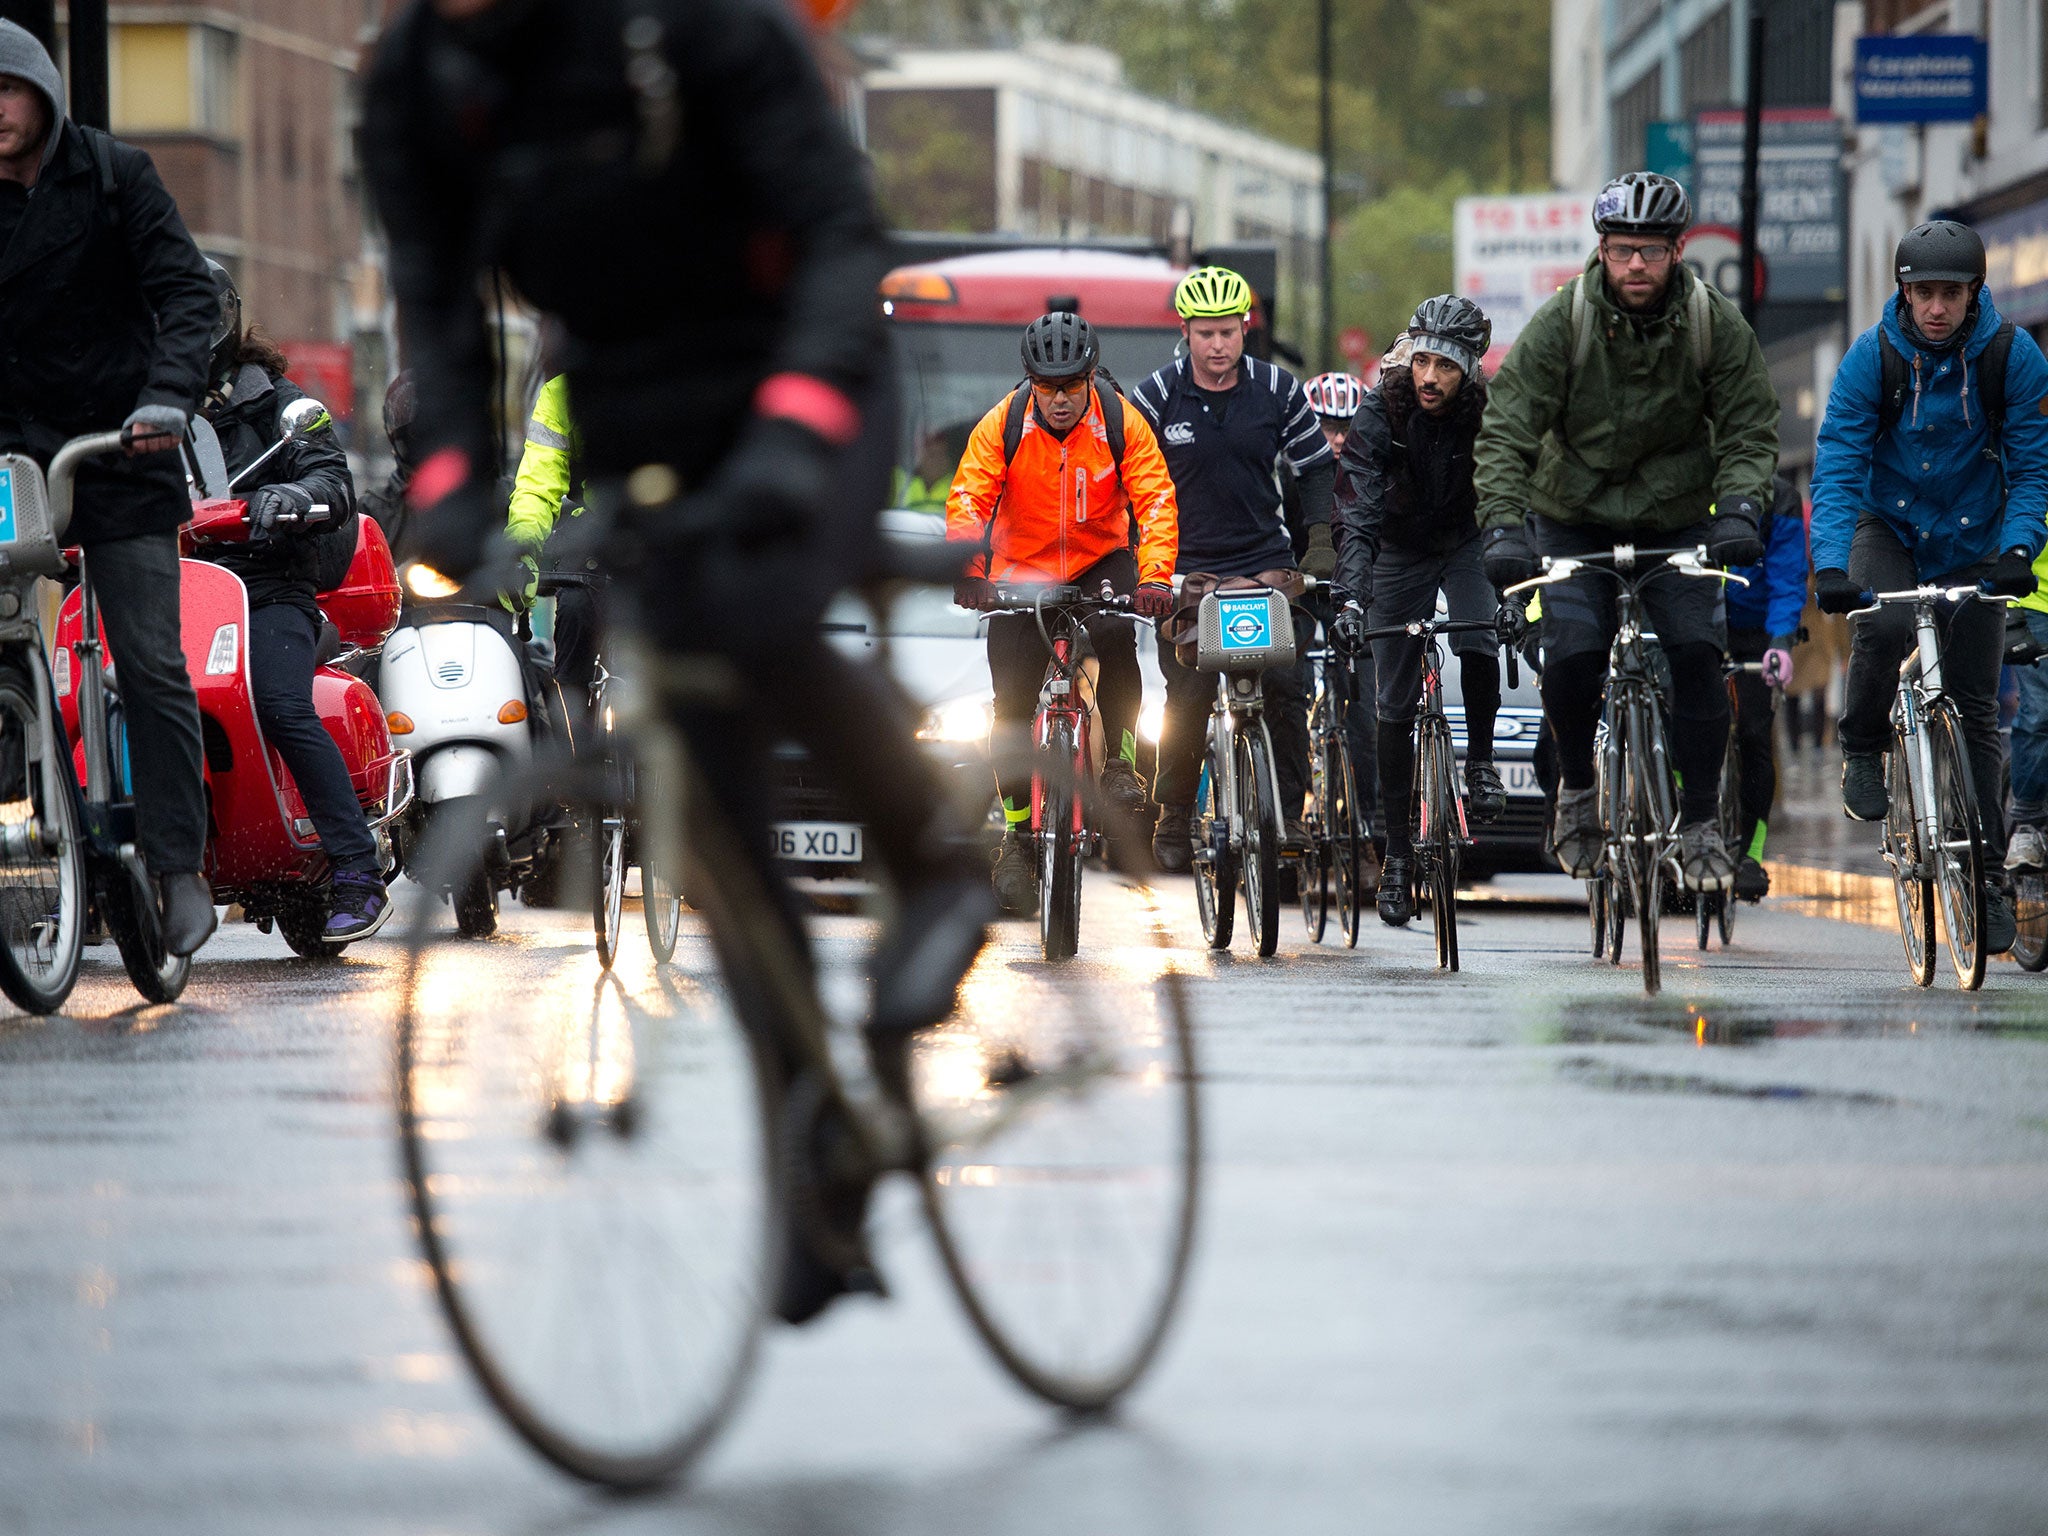 The Transport Select Committee demanded a five-fold increase in cycling infrastructure spending to cut casualties